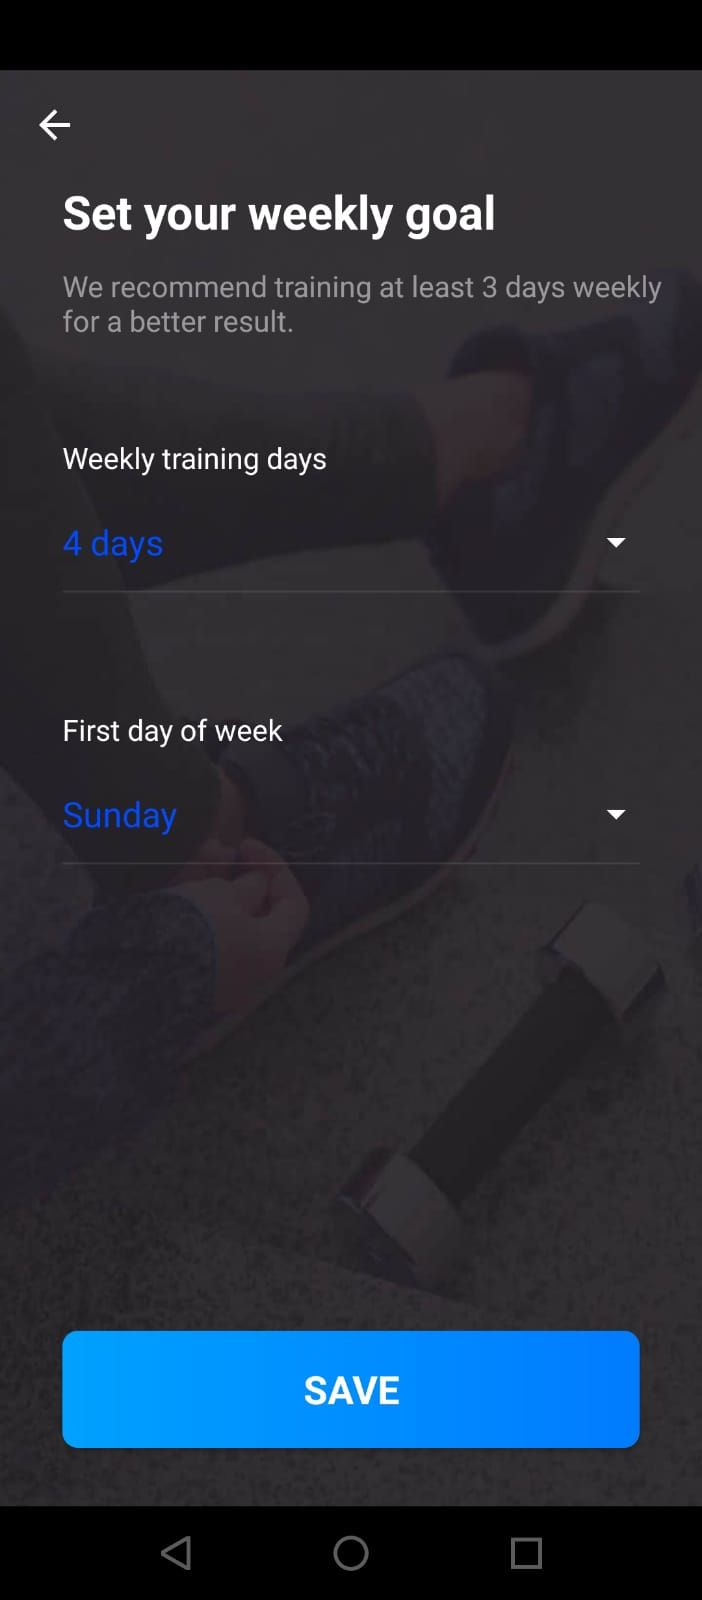 Home Workout - Setting Weekly Goals